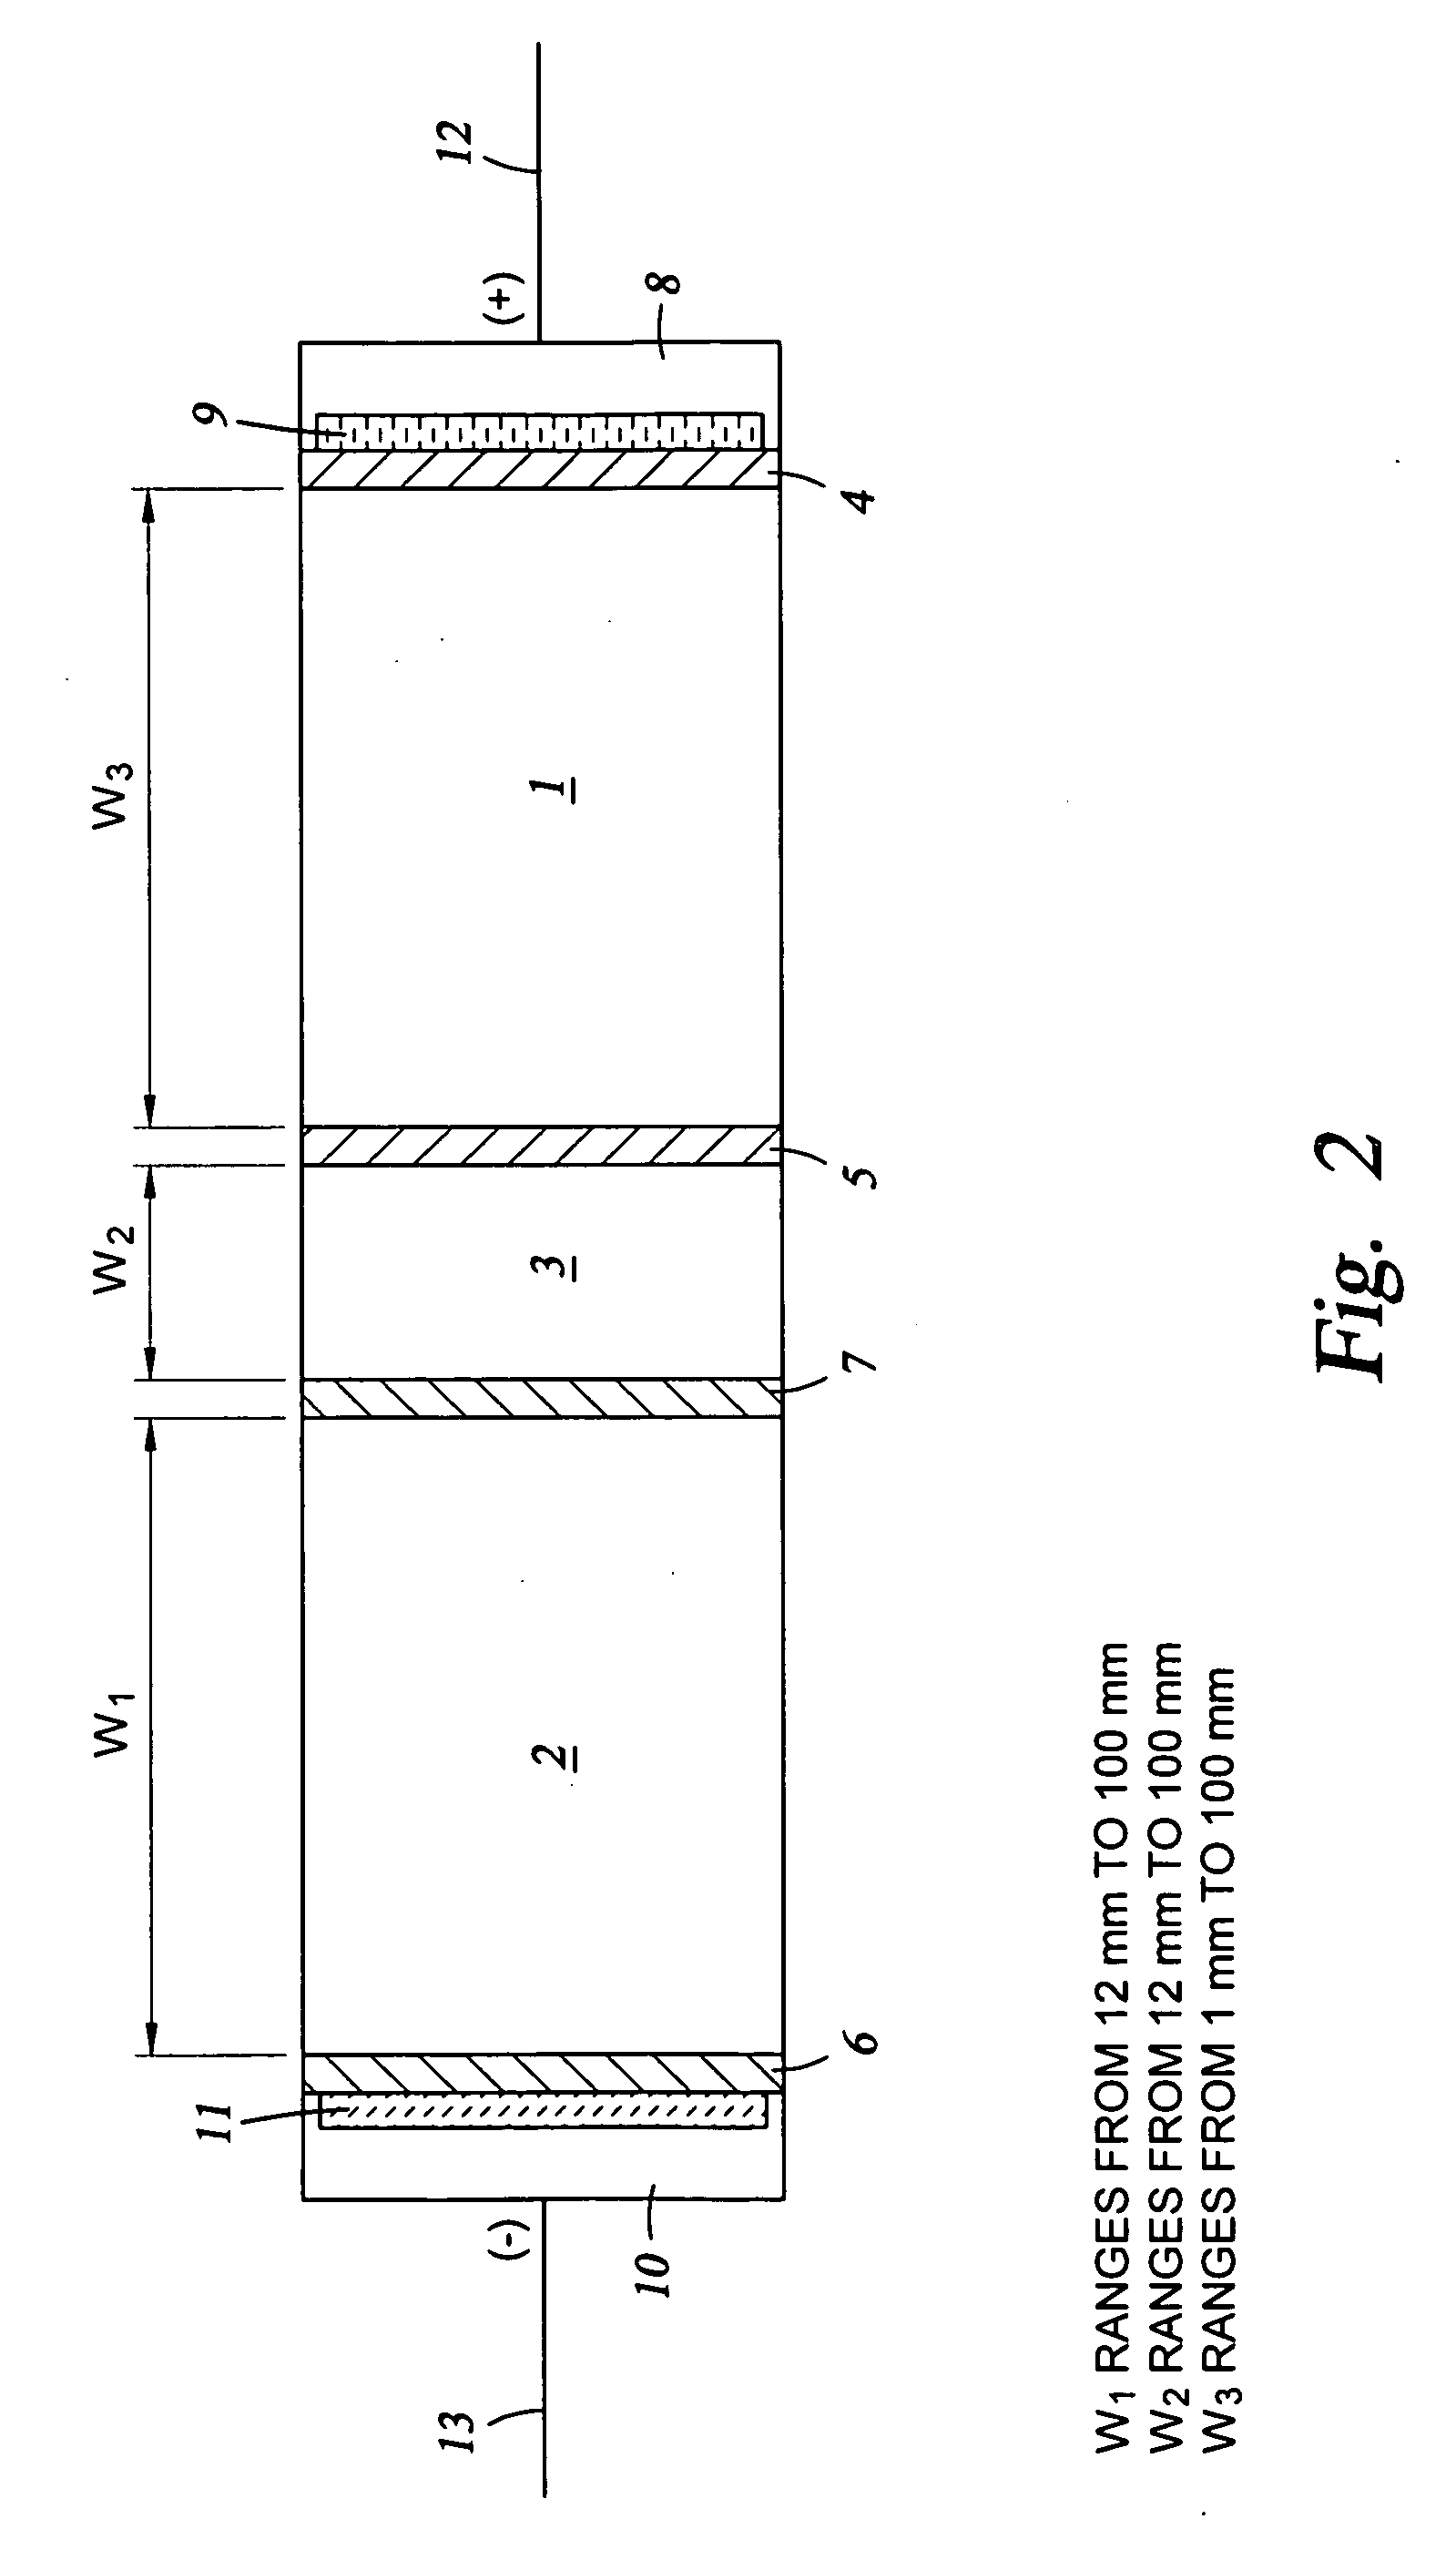 Method of ion chromatography wherein a specialized electrodeionization apparatus is used